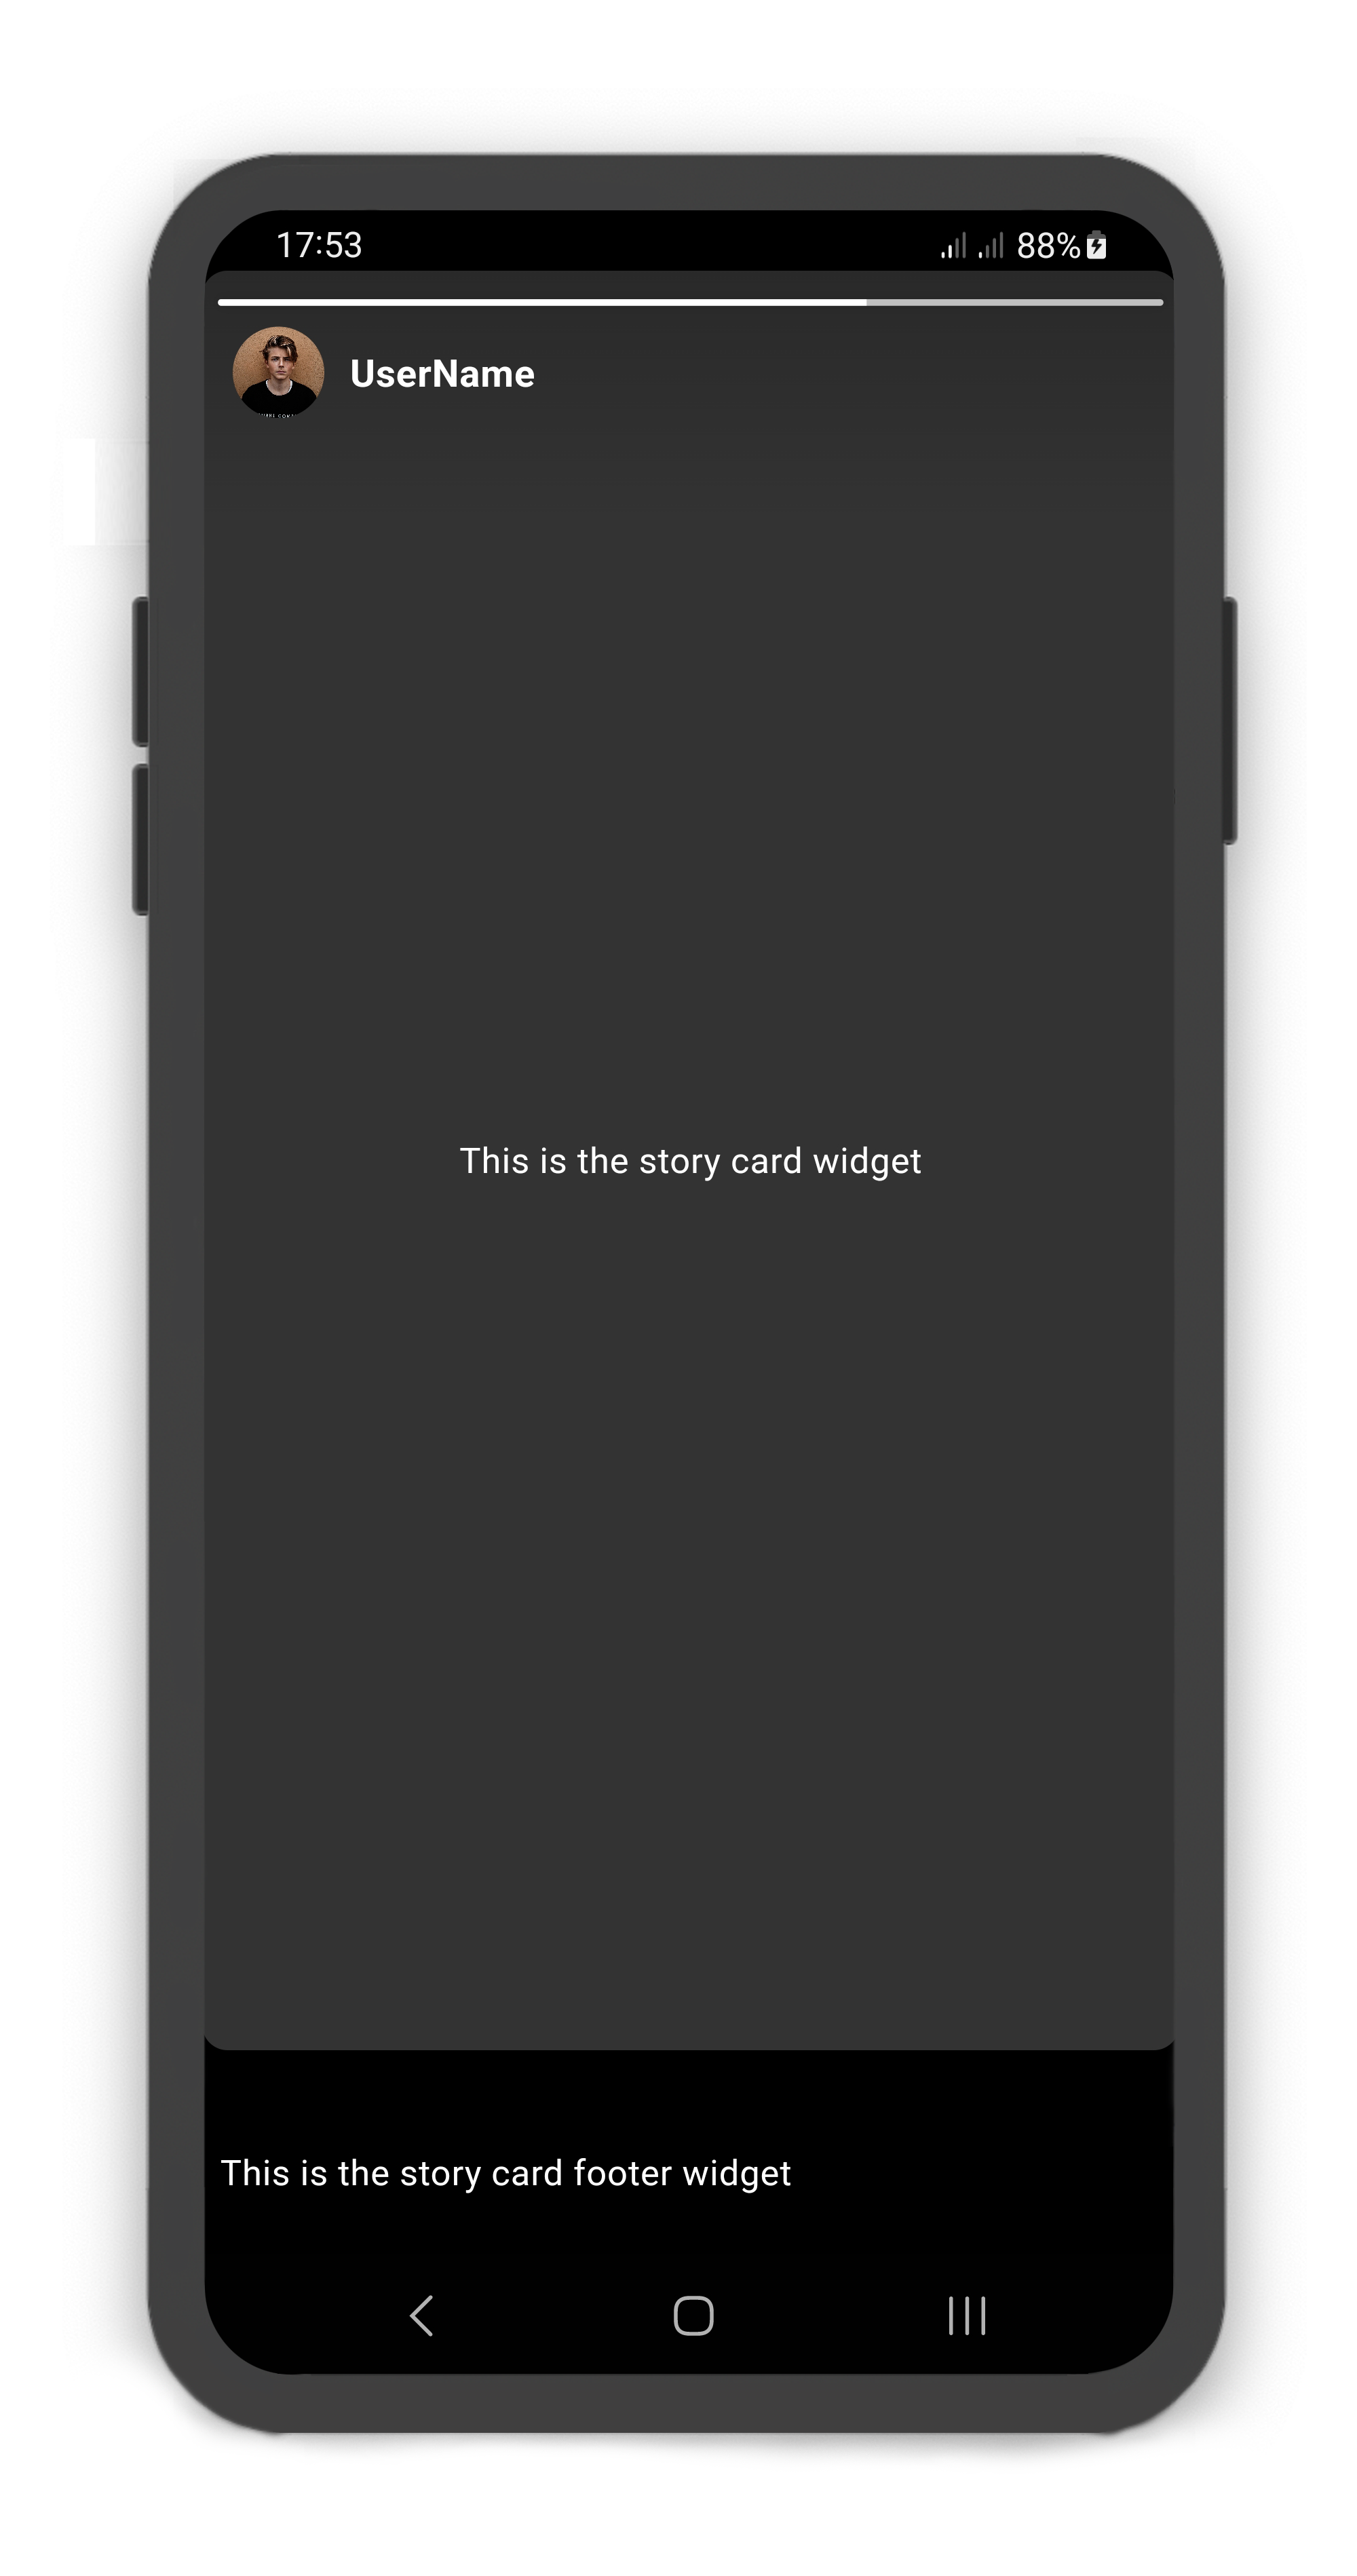 StoryCardFooter